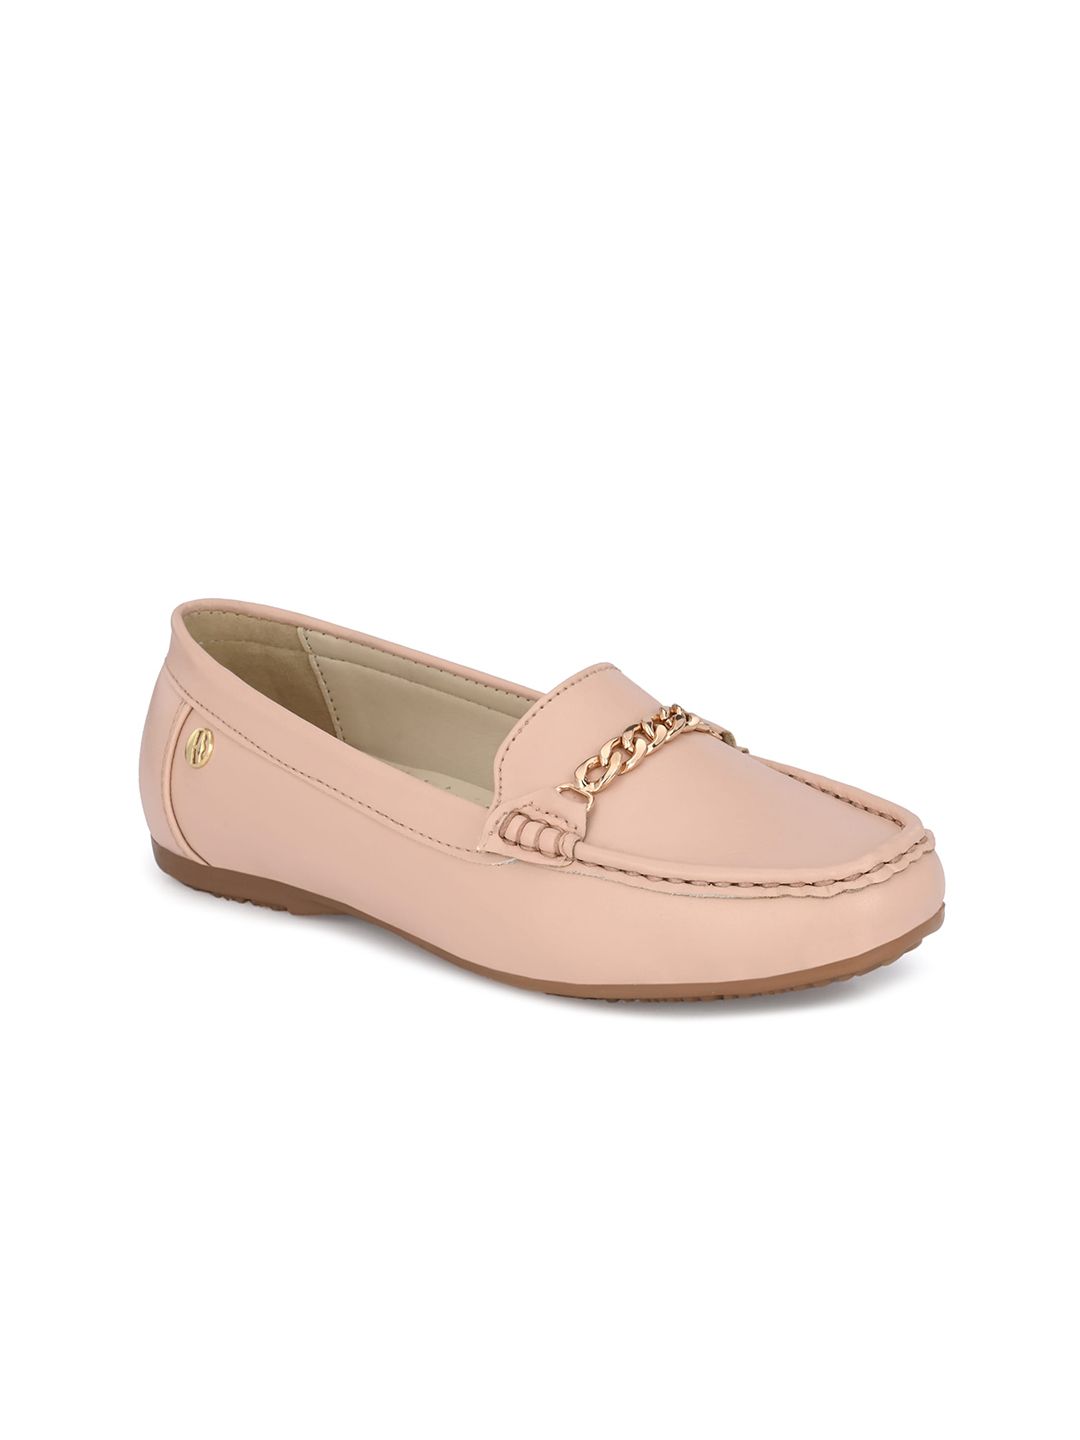 ELLE Women Penny Loafers Price in India